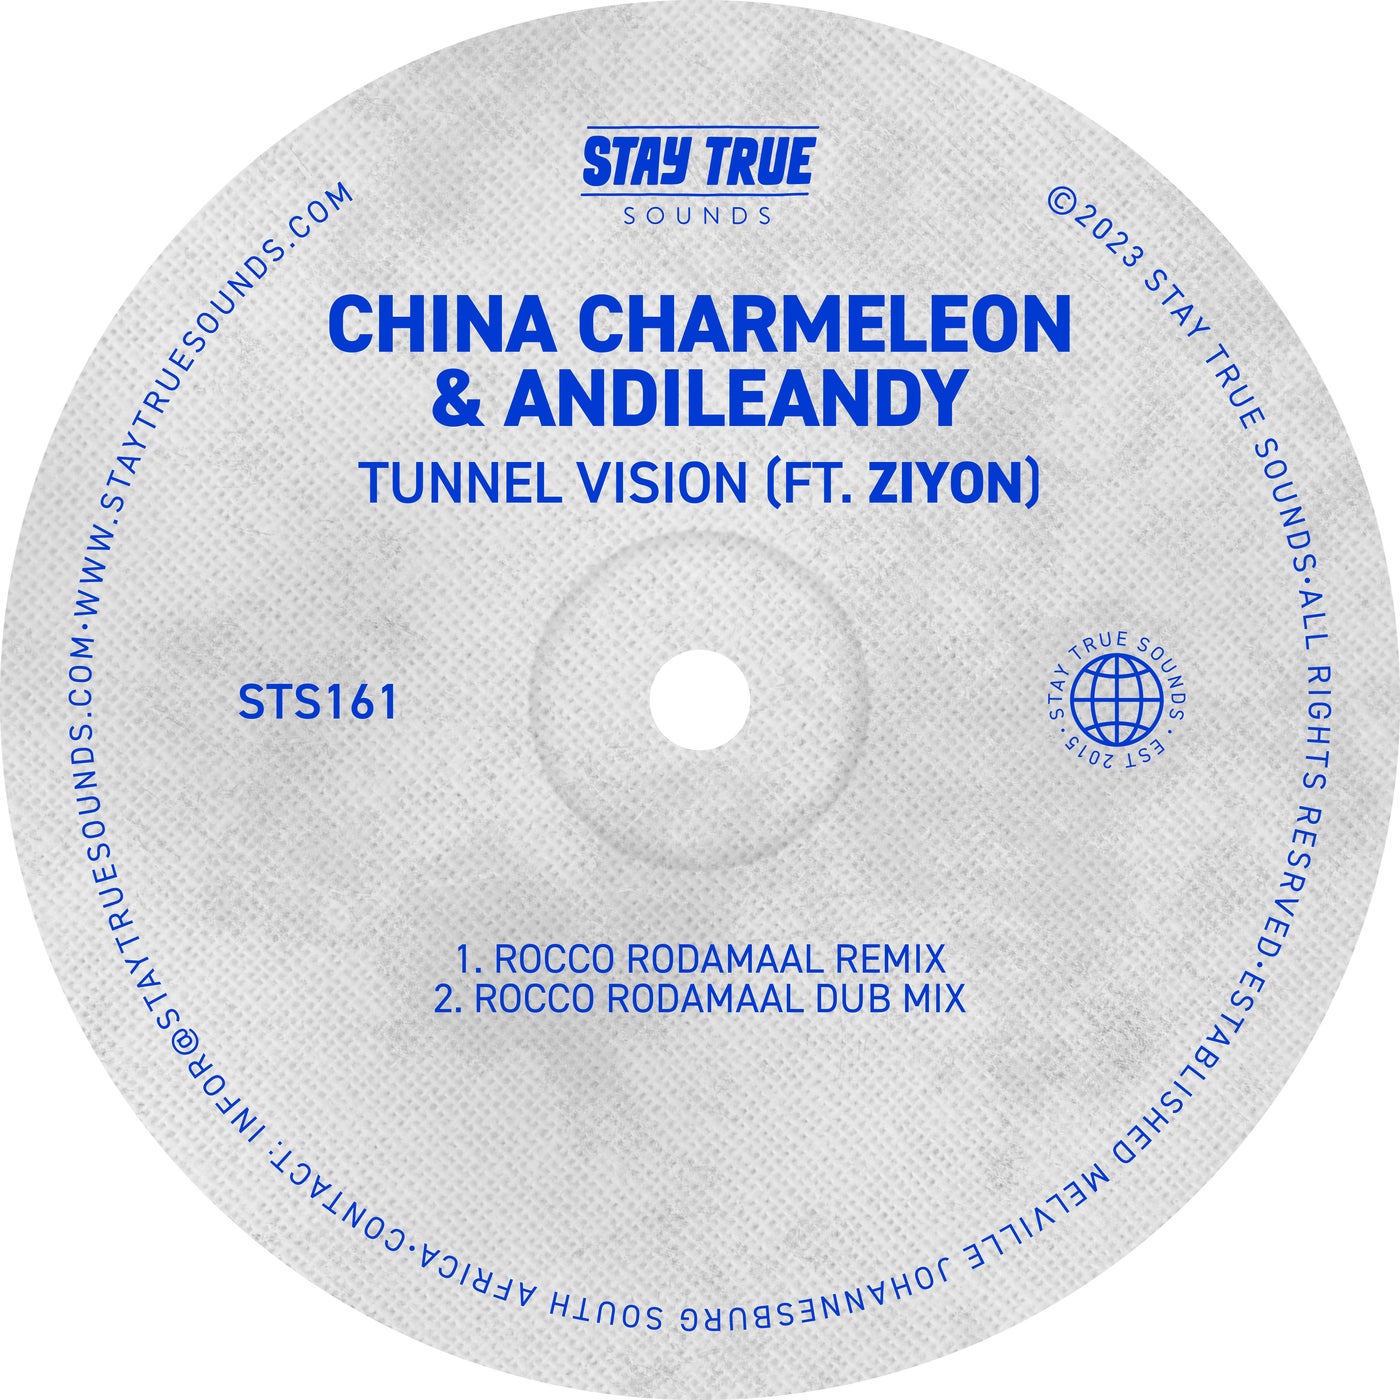 China Charmeleon & AndileAndy - Tunnel Vision (feat. Ziyon) [Rocco Rodamaal Remix] [Stay True Sounds]